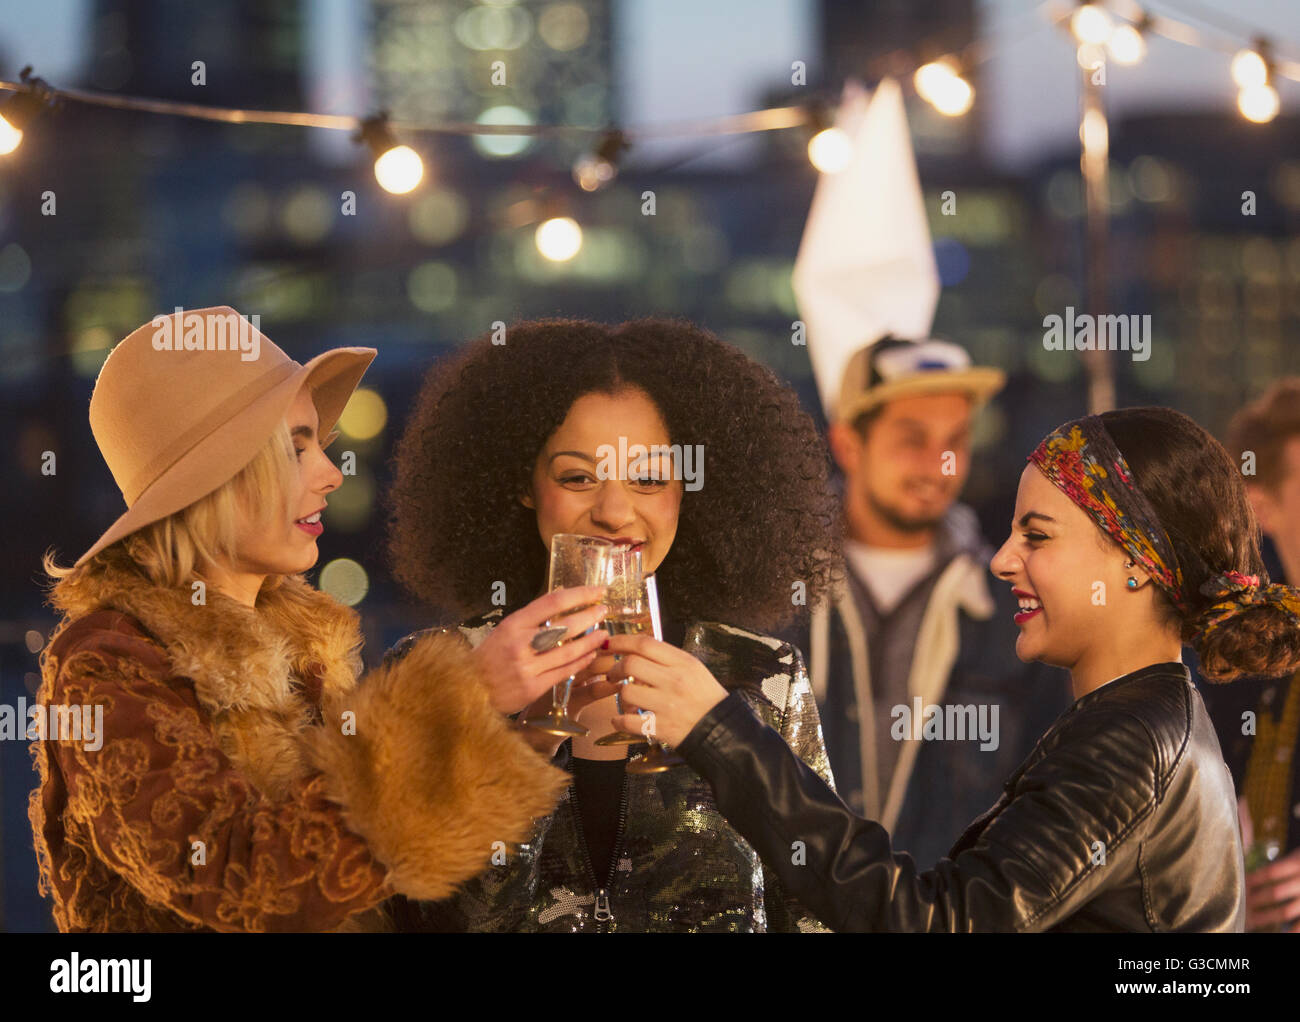 Young women toasting champagne glasses at nighttime rooftop party Stock Photo